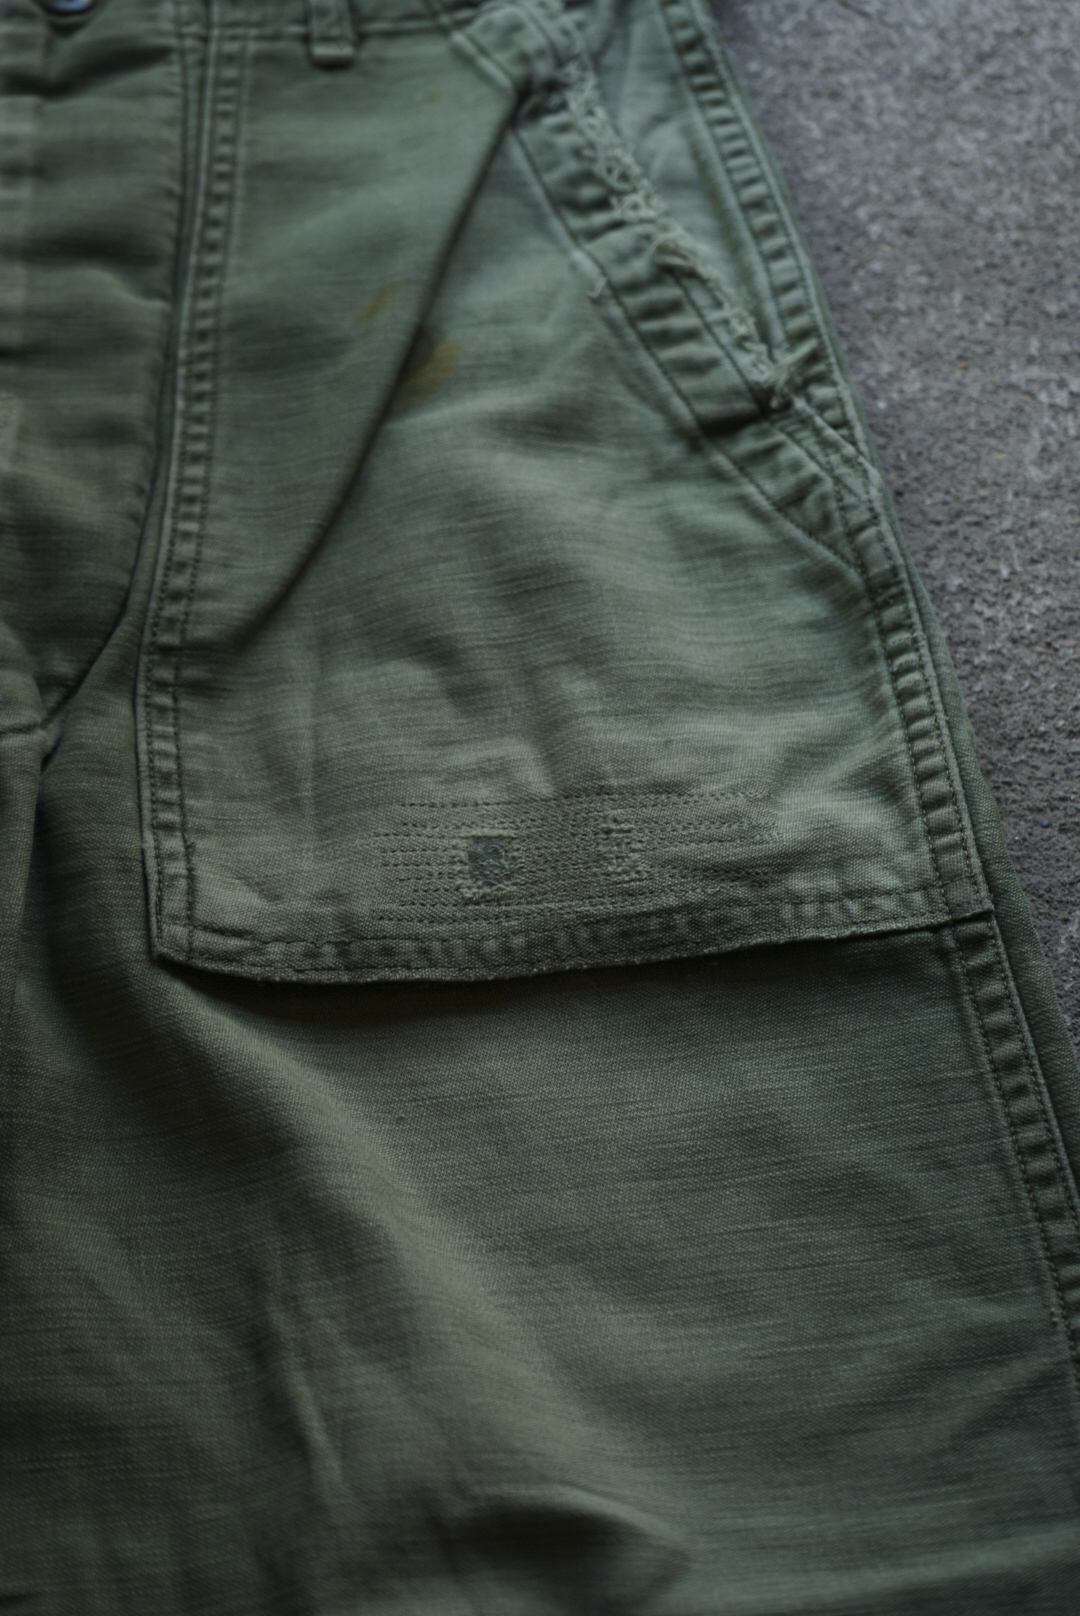 US ARMY BAKER PANTS REPAIRED 05